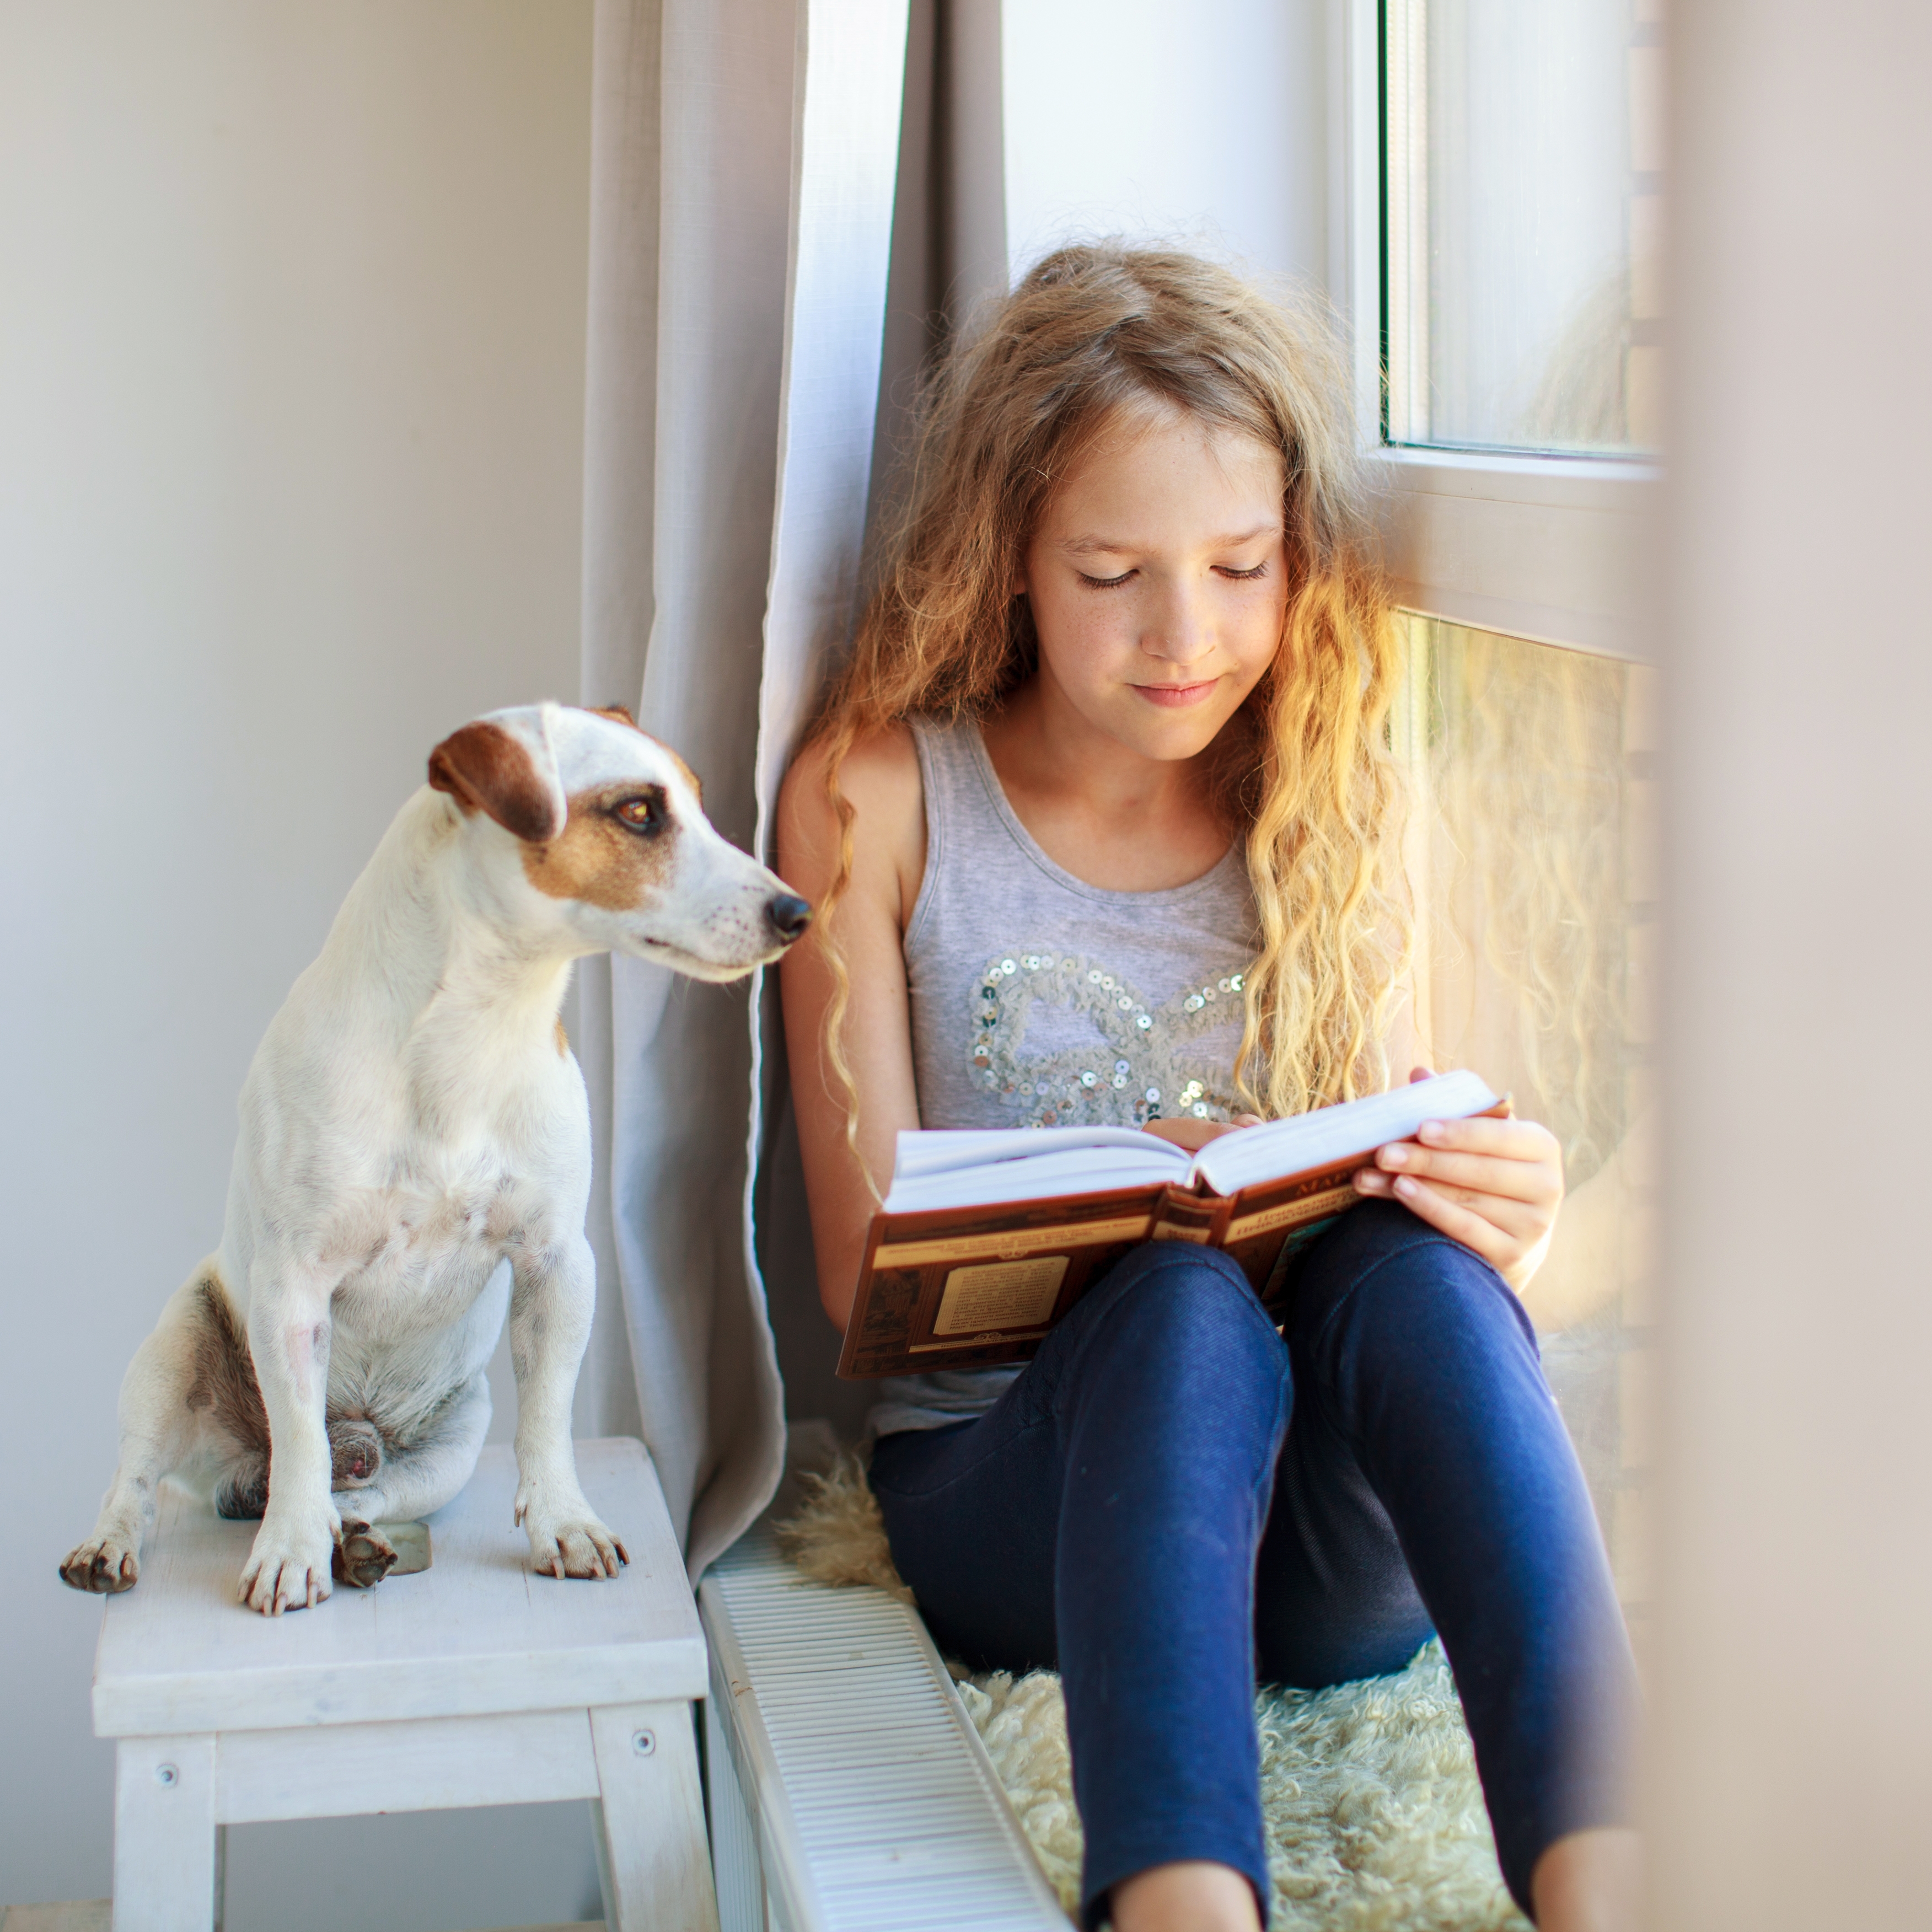 A young girl reads a book sitting near the window with her dog beside her | Source: Shutterstock